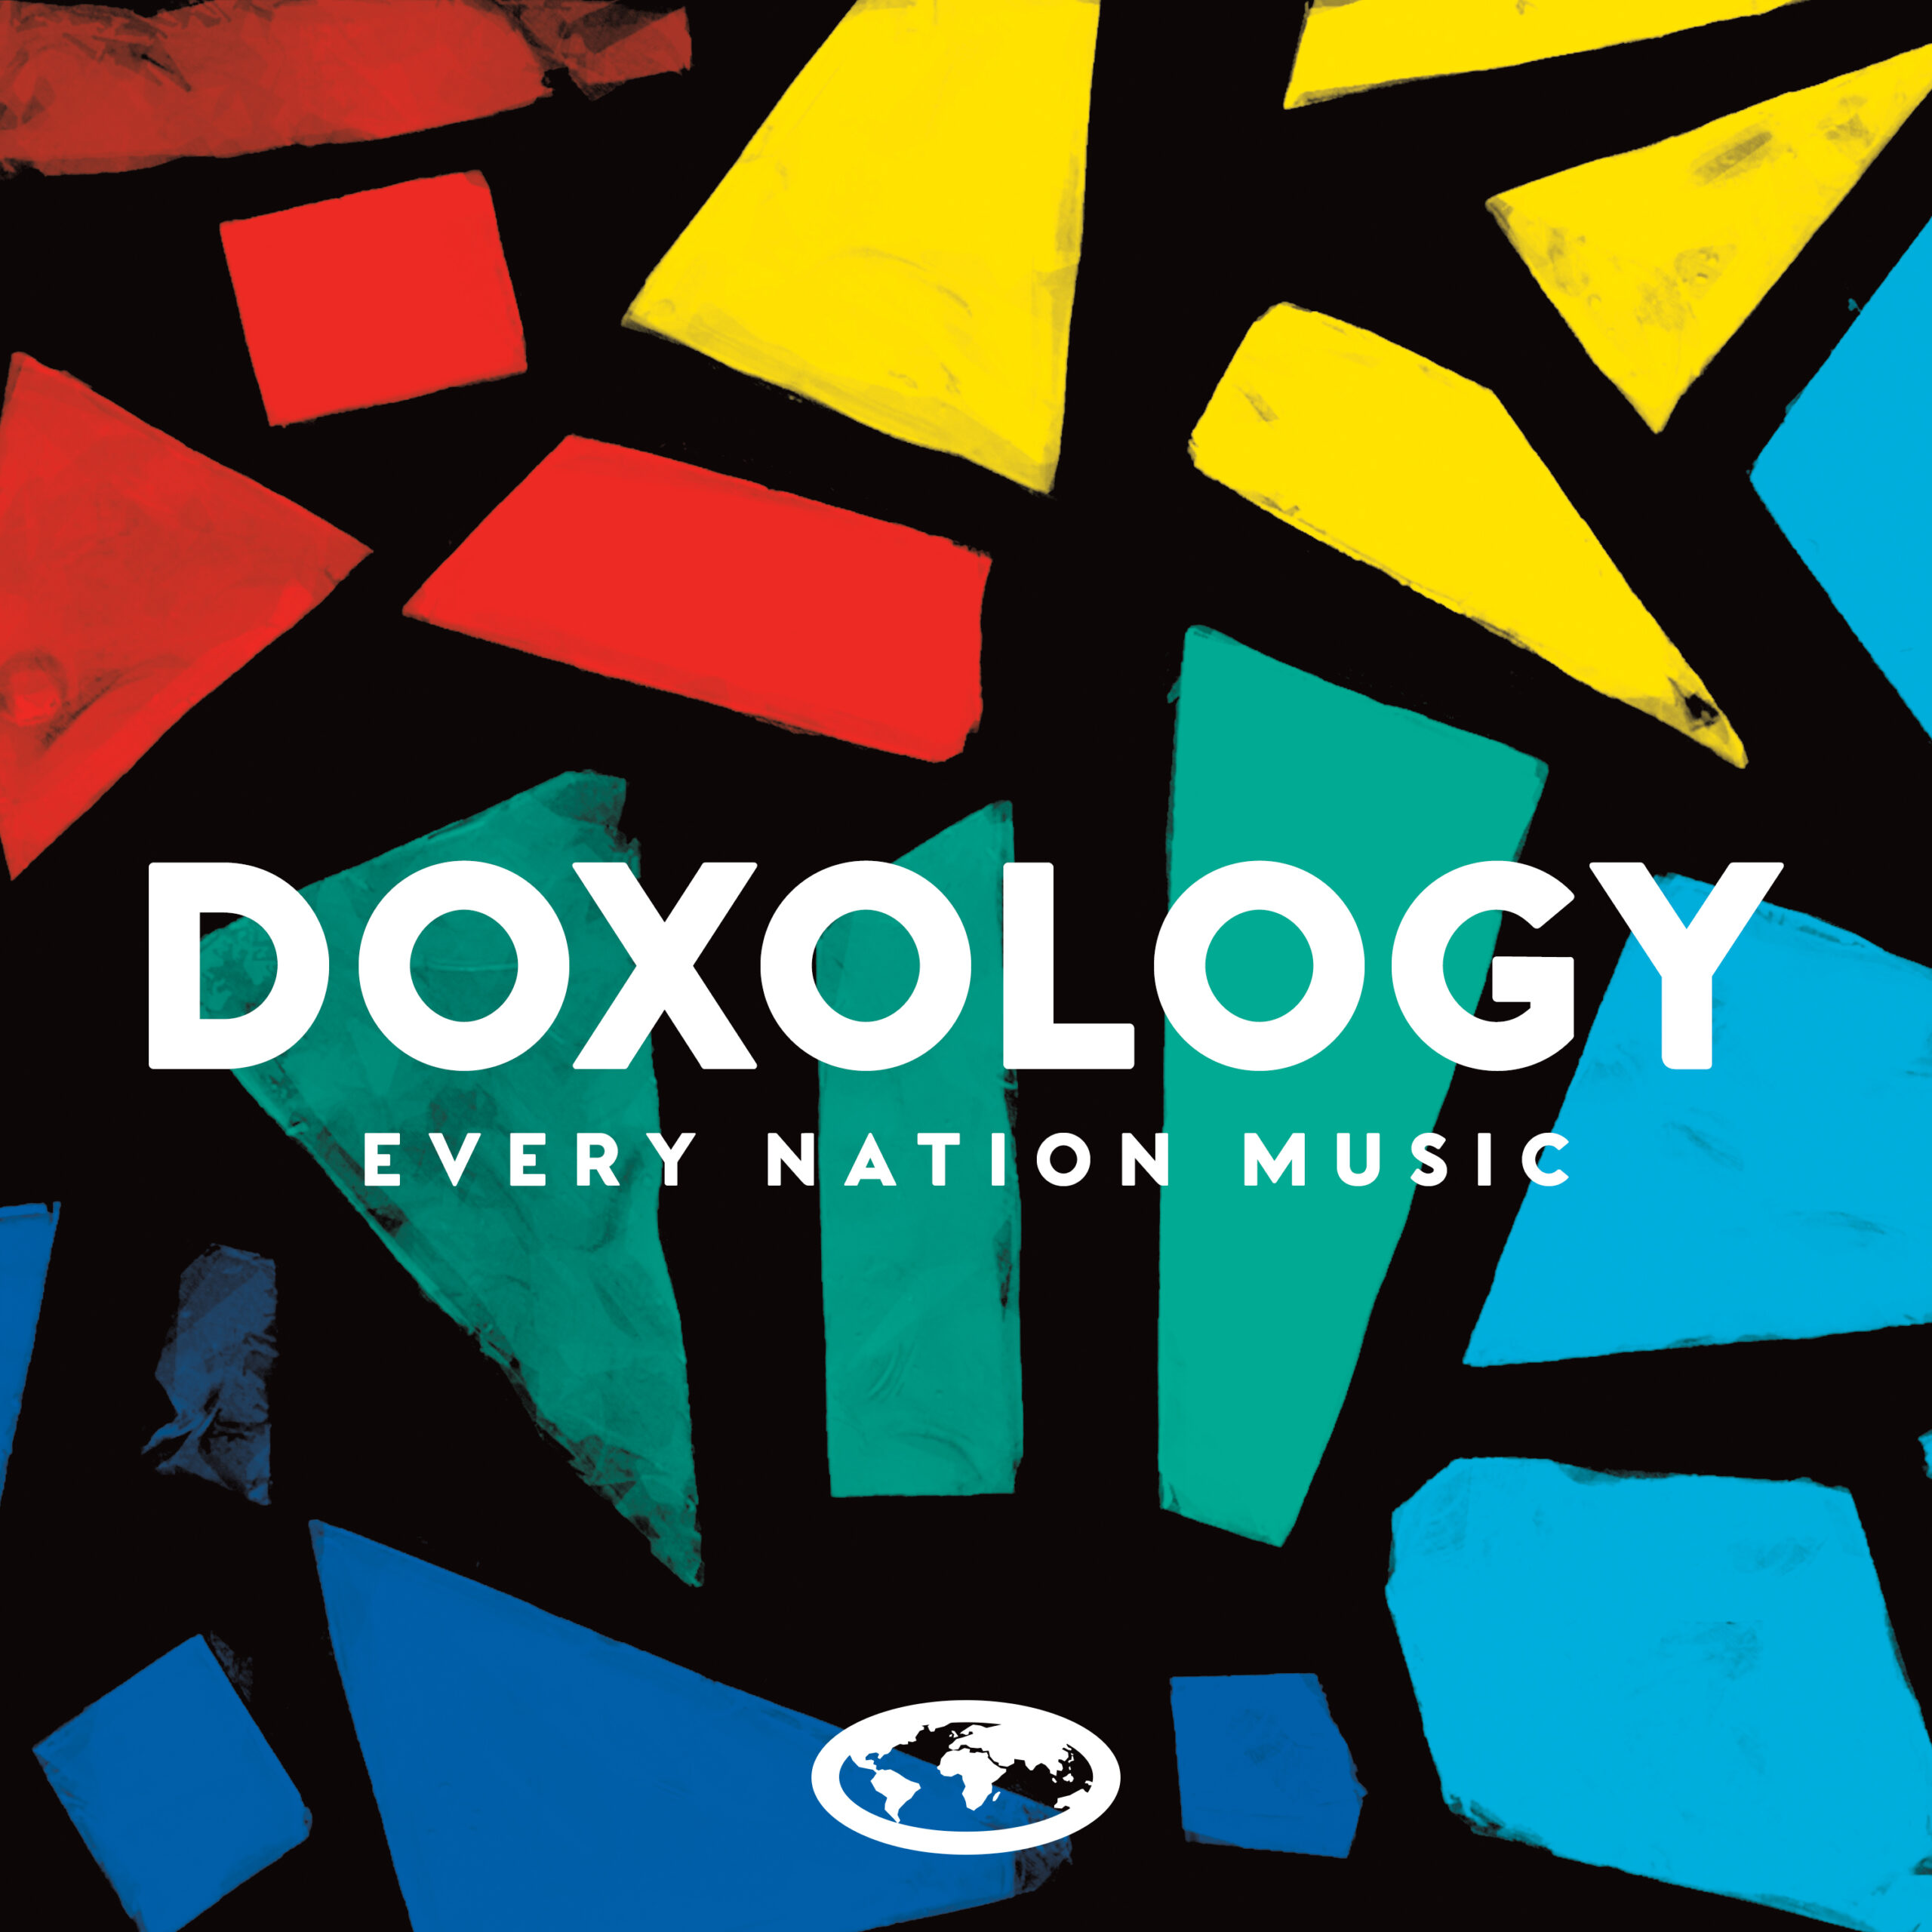 Doxology, Every Nation Music